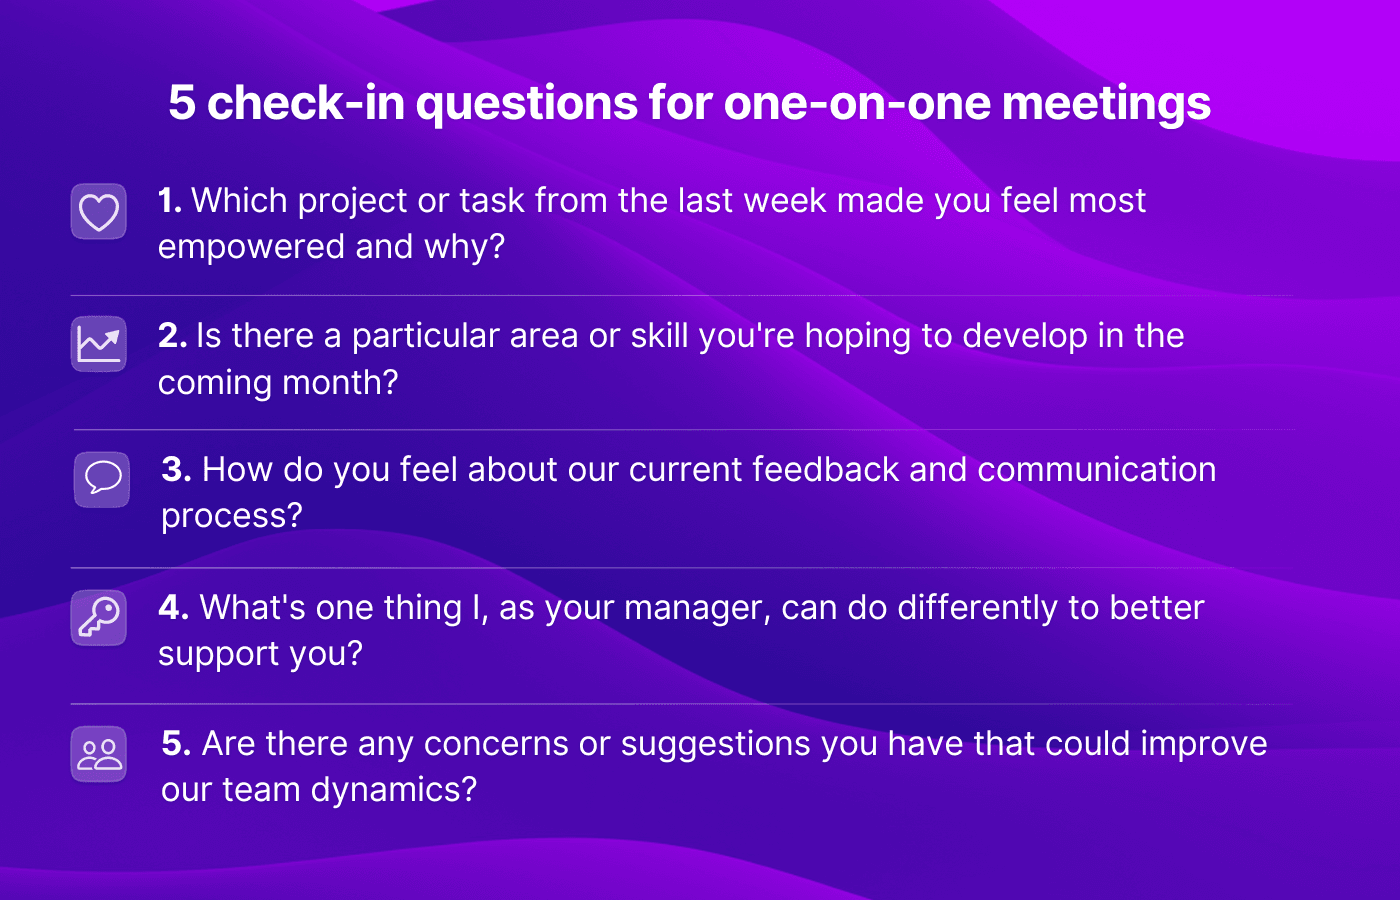 Check-in questions for 1:1 meetings